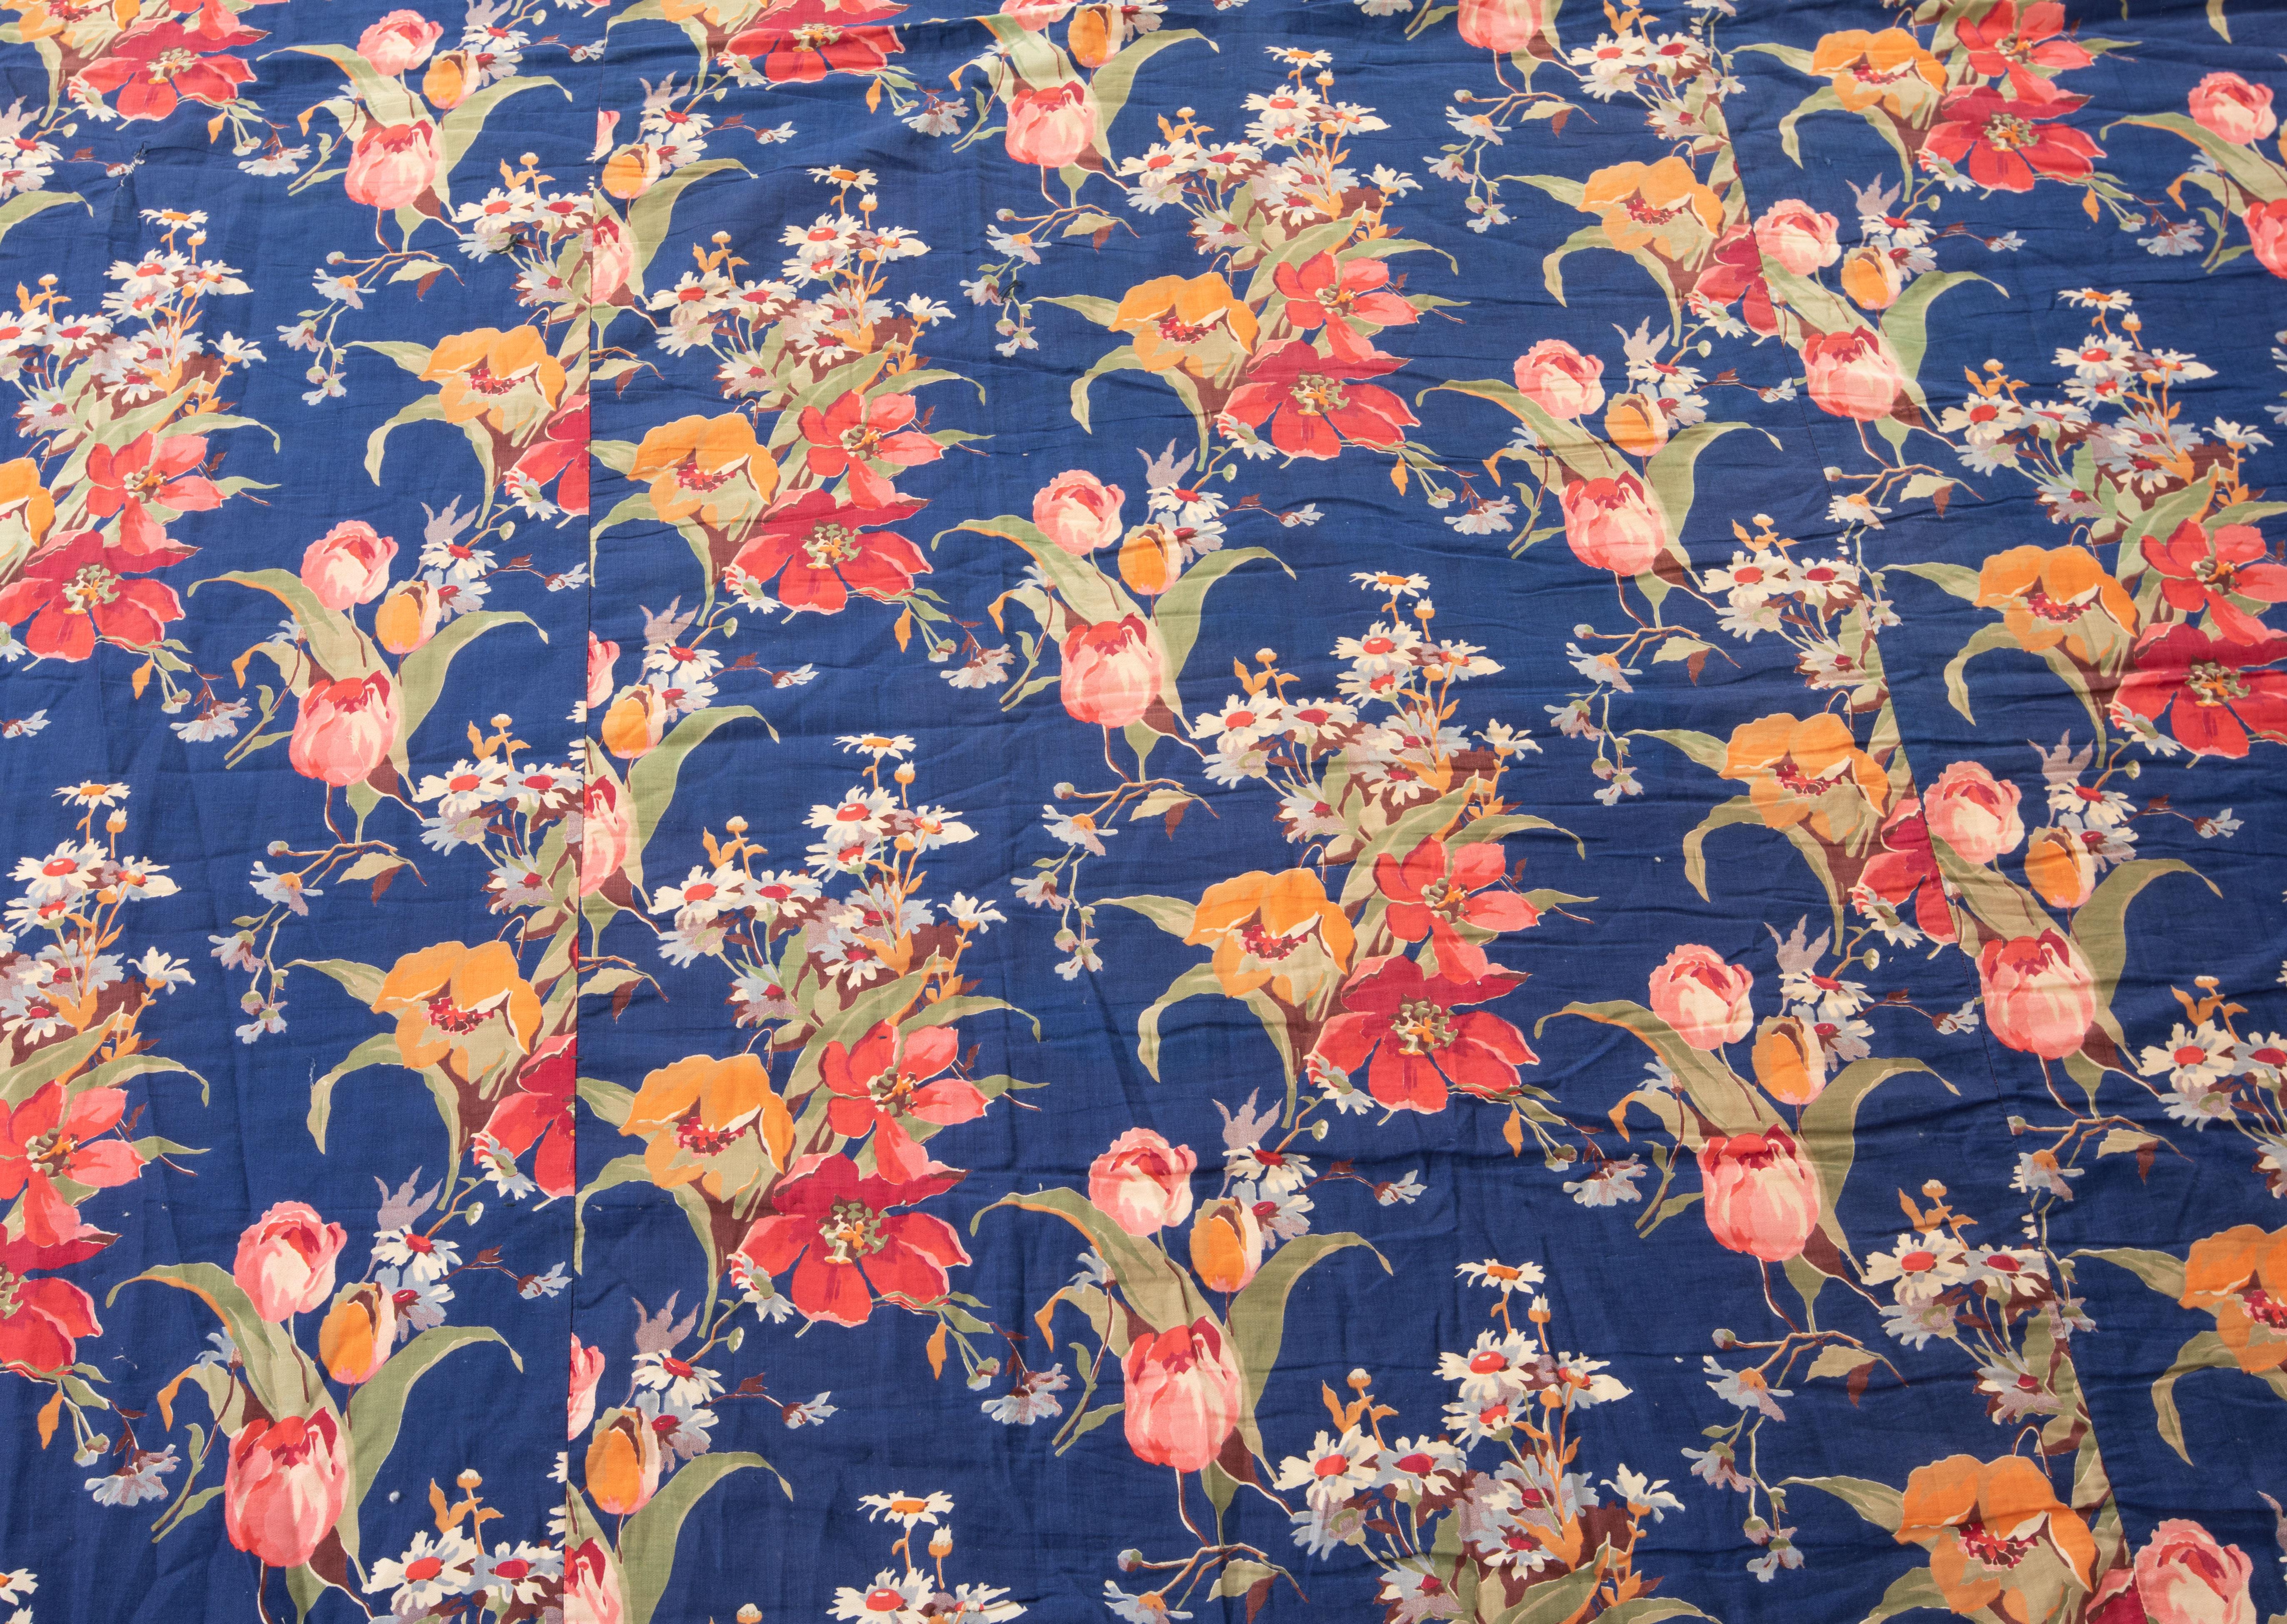 Russian Roller Printed Cotton Fabric Panel, Mid-20th Century or Earlier In Good Condition For Sale In Istanbul, TR